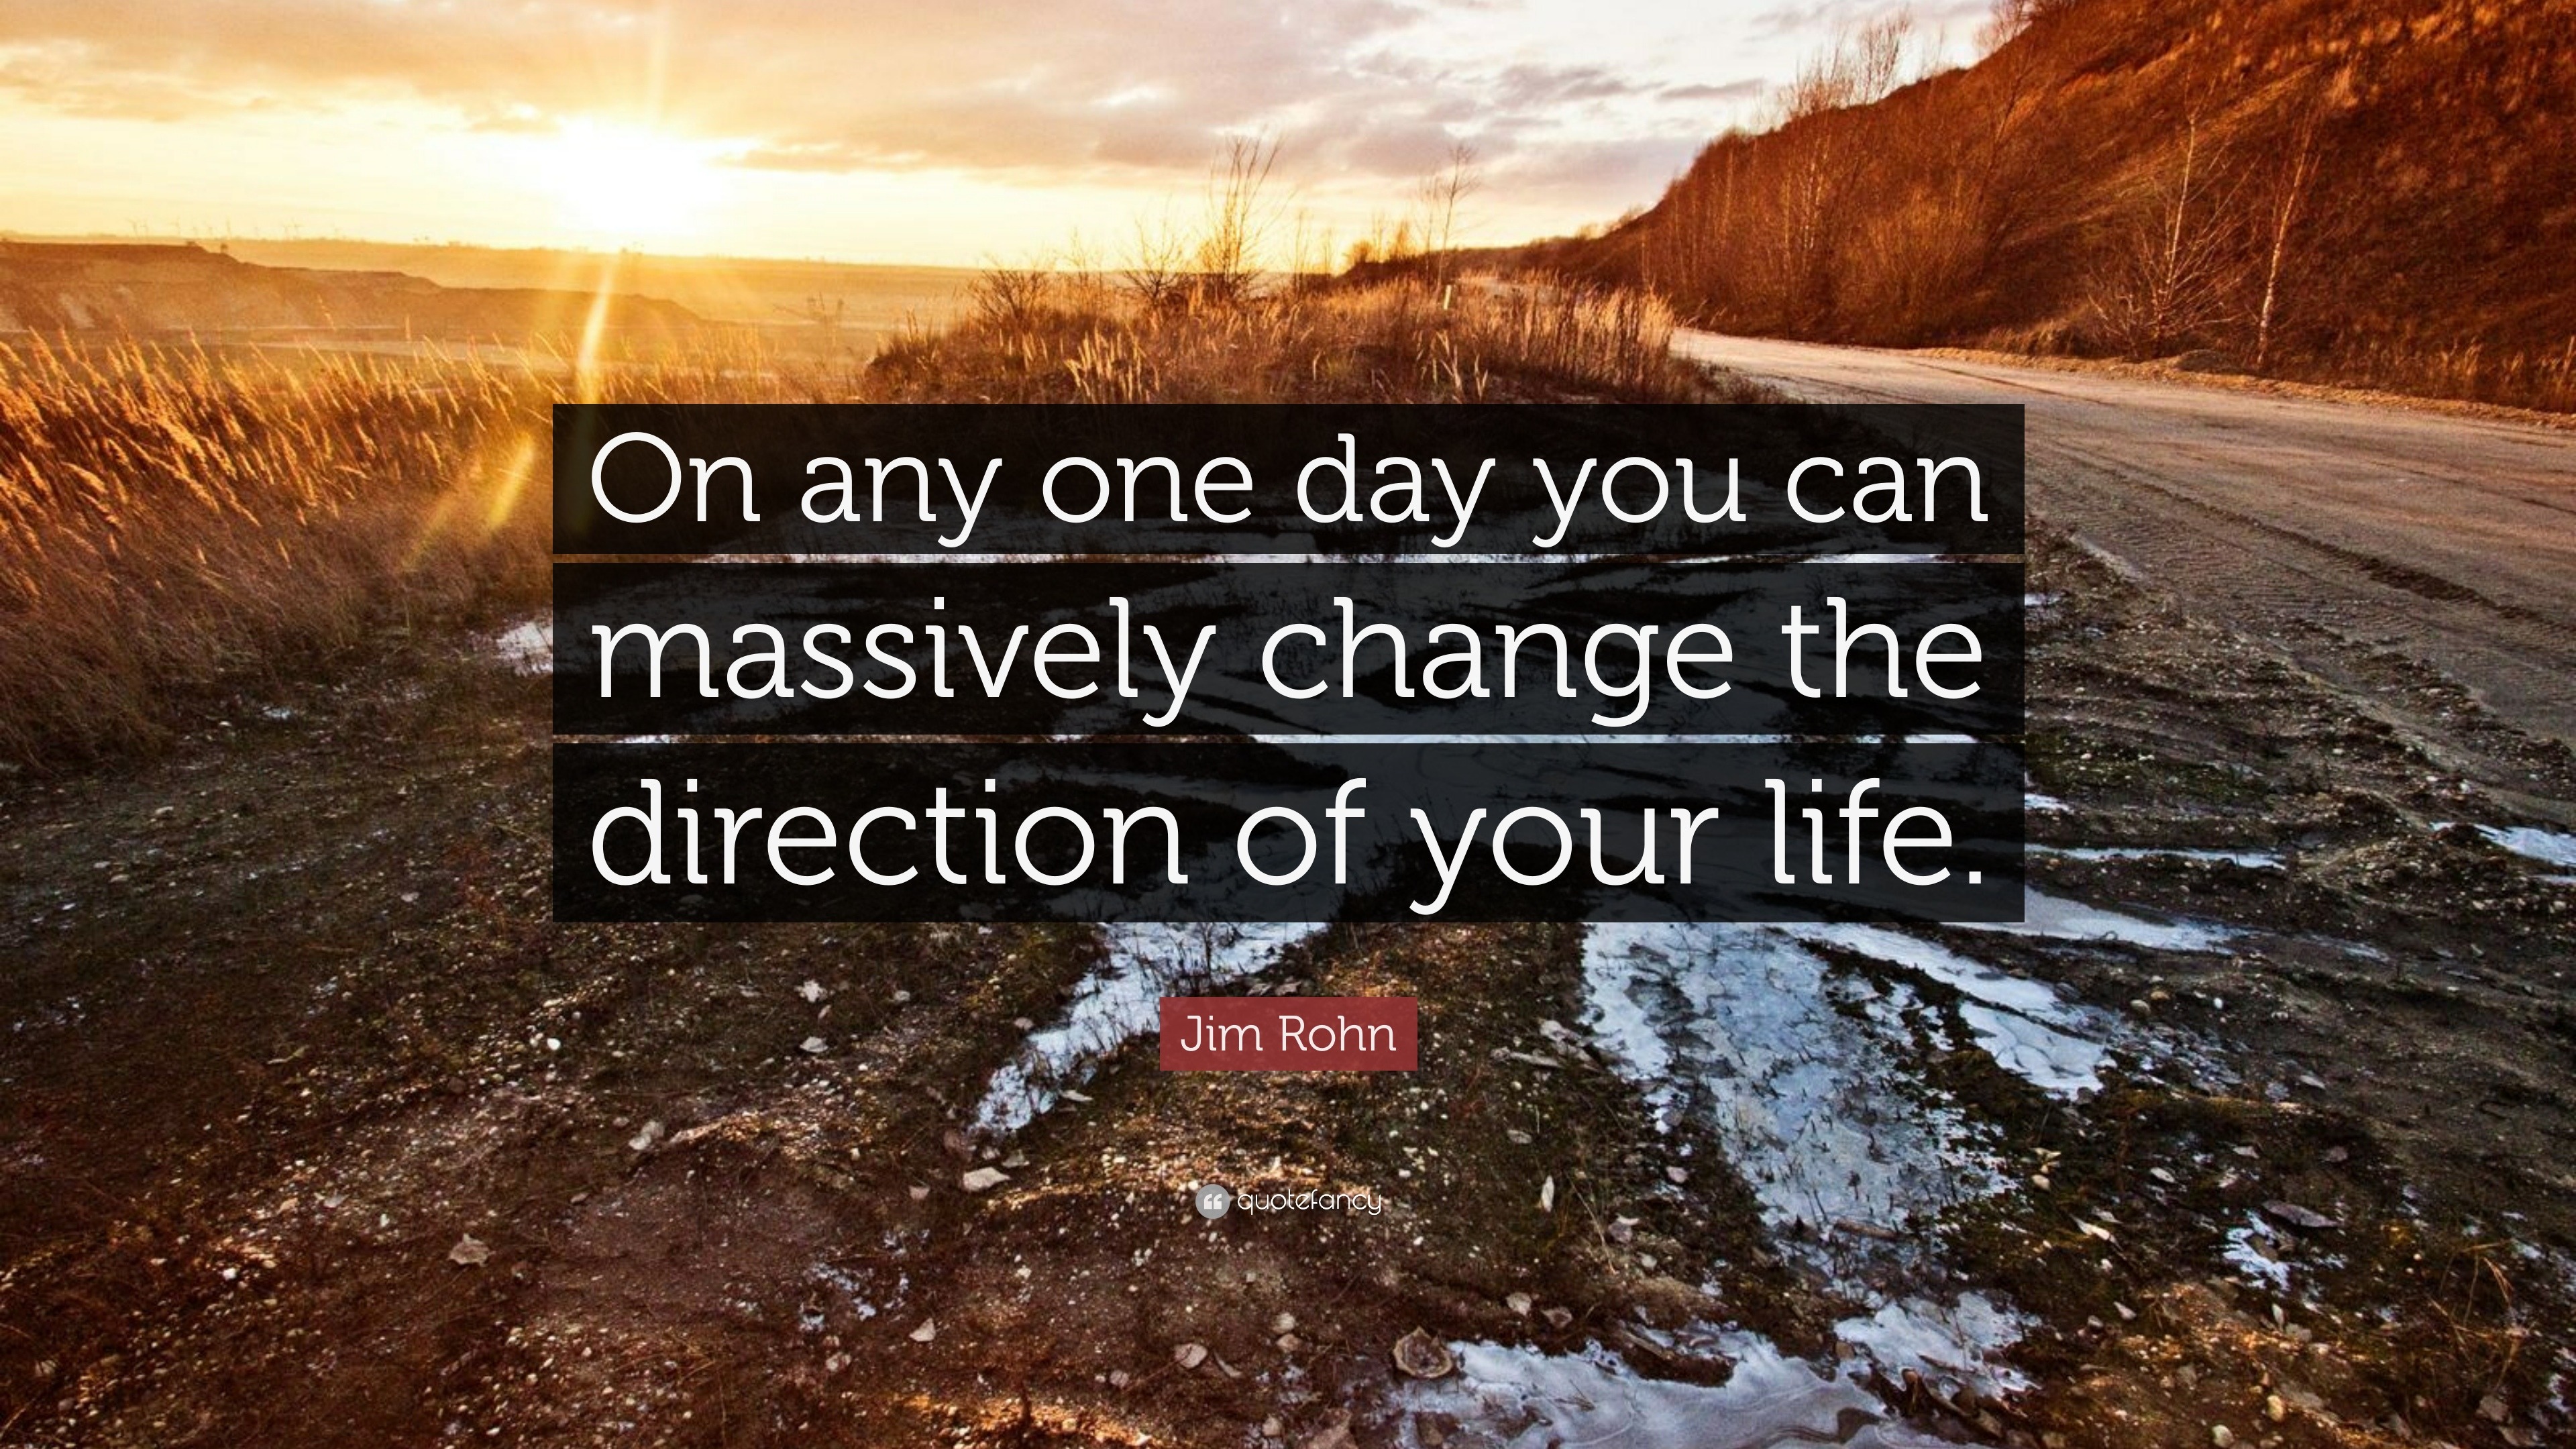 Jim Rohn Quote “ any one day you can massively change the direction of